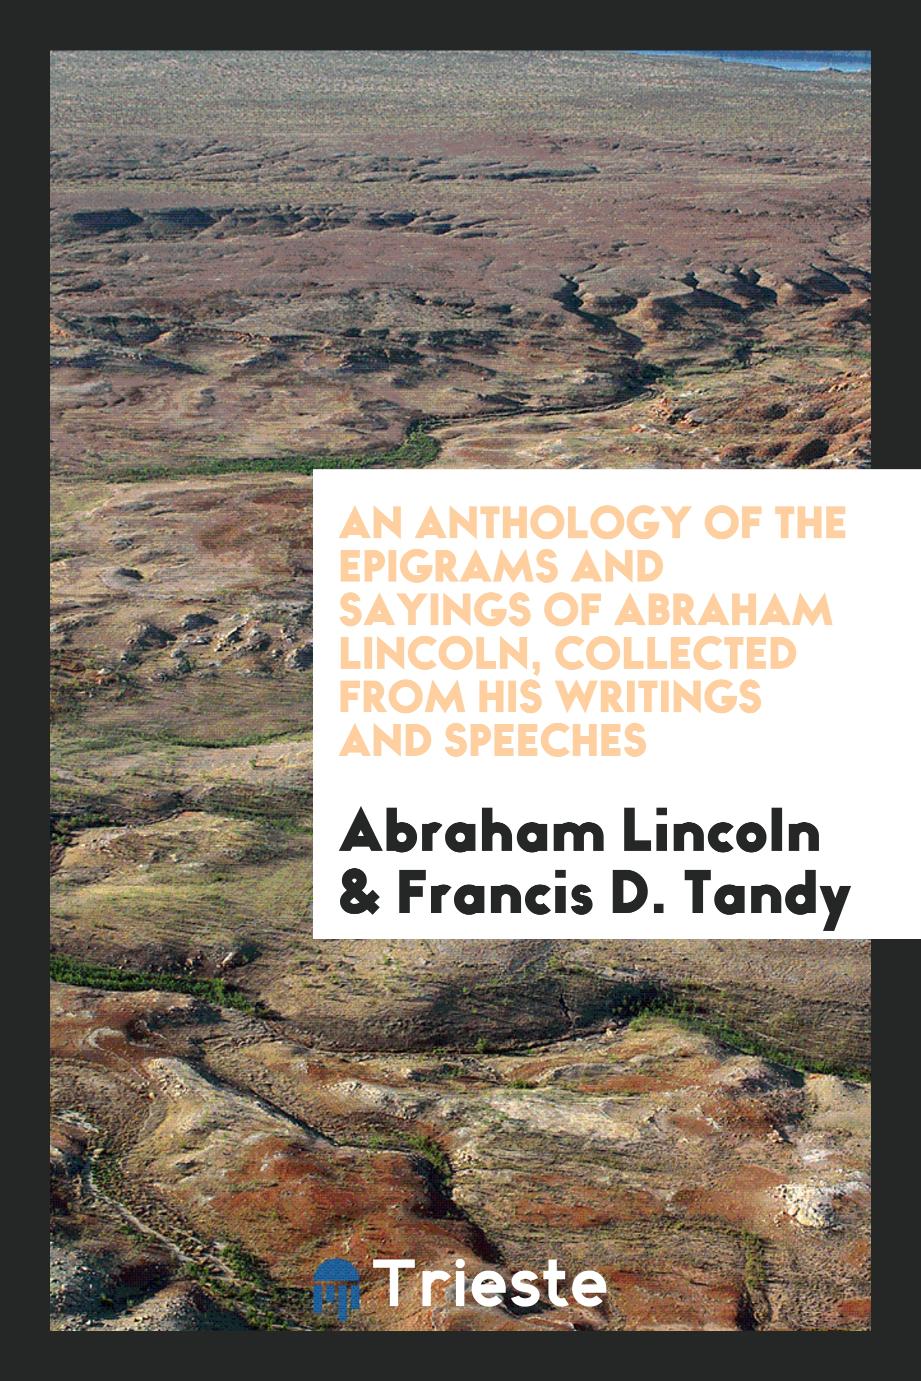 An anthology of the epigrams and sayings of Abraham Lincoln, collected from his writings and speeches